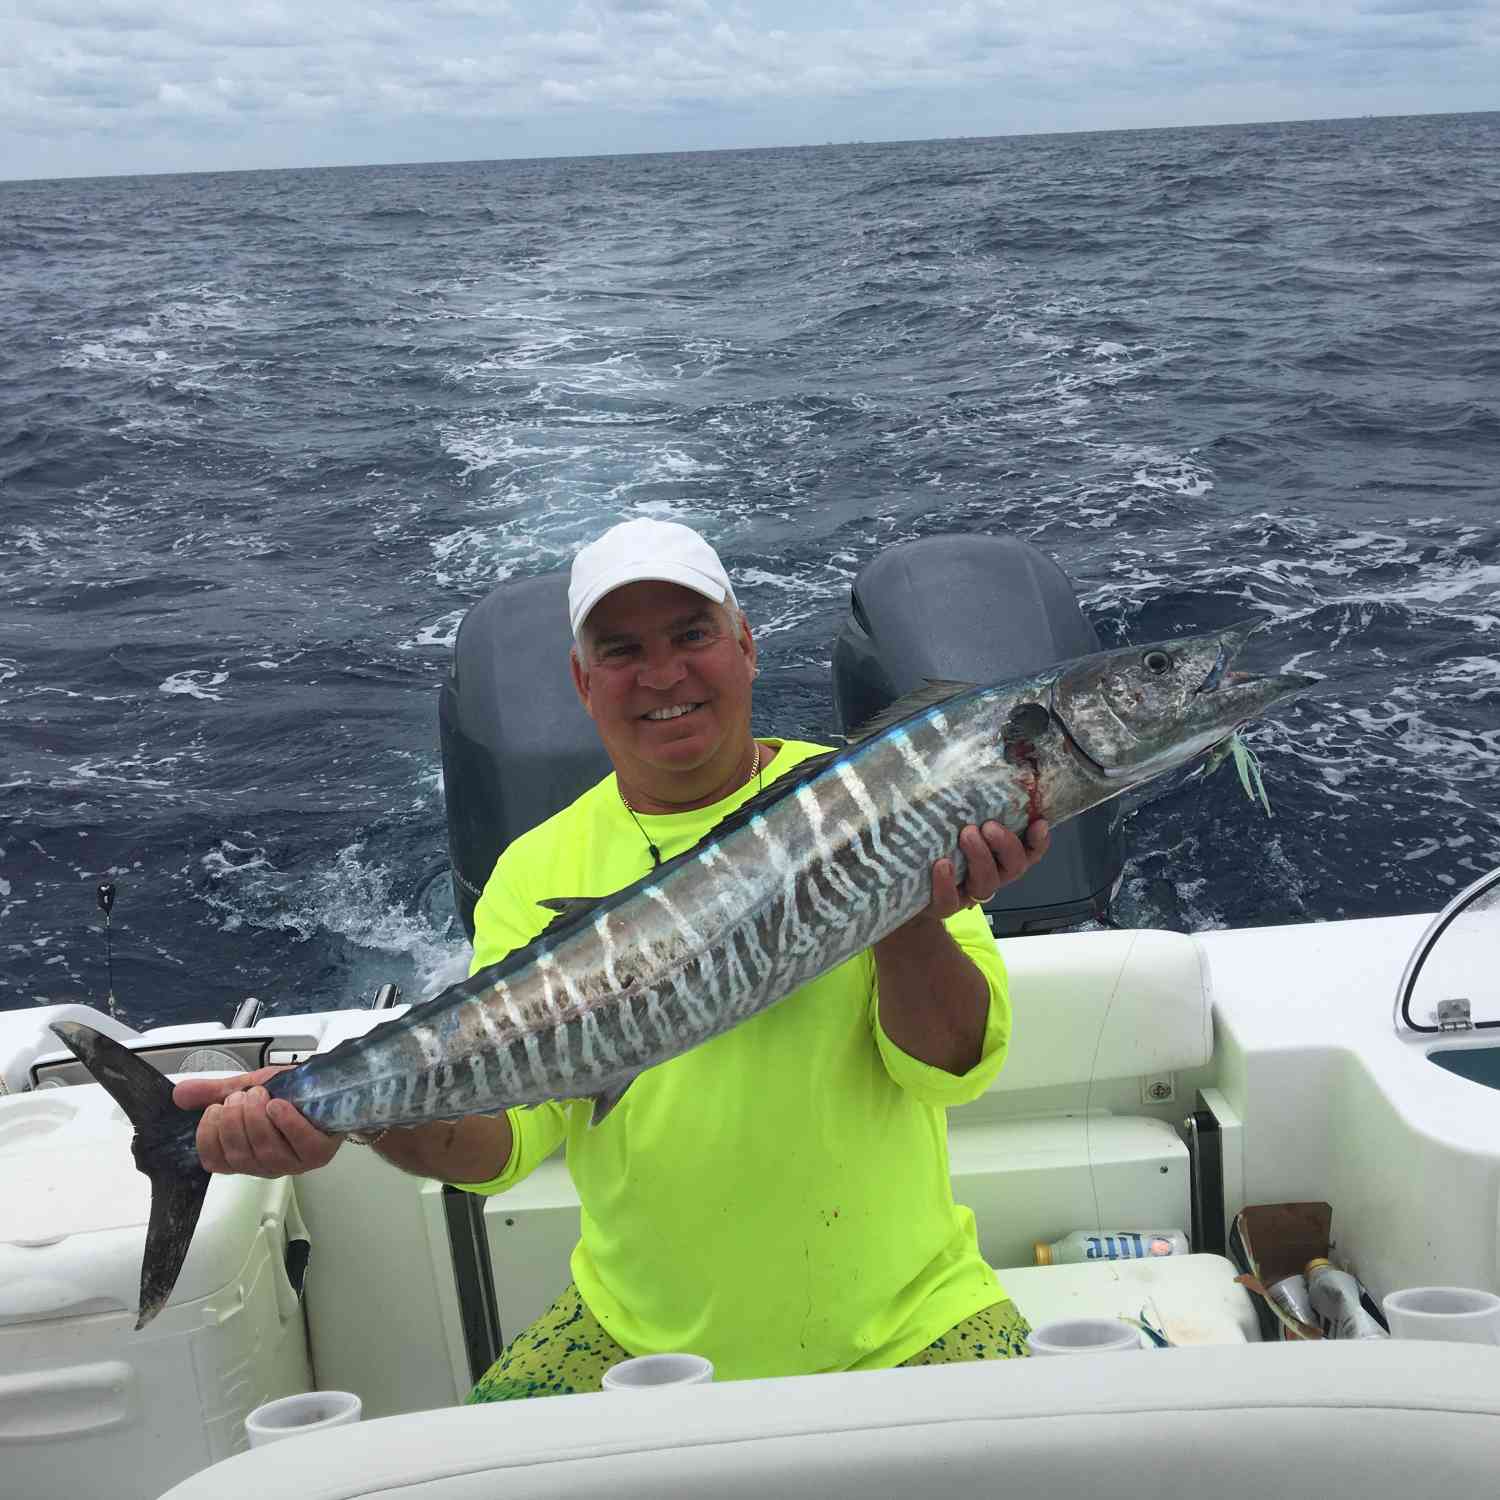 May 12th 2018. First wahoo taken in my new 2018 Sportsman Open 252. Small chain rigged ballyhoo...